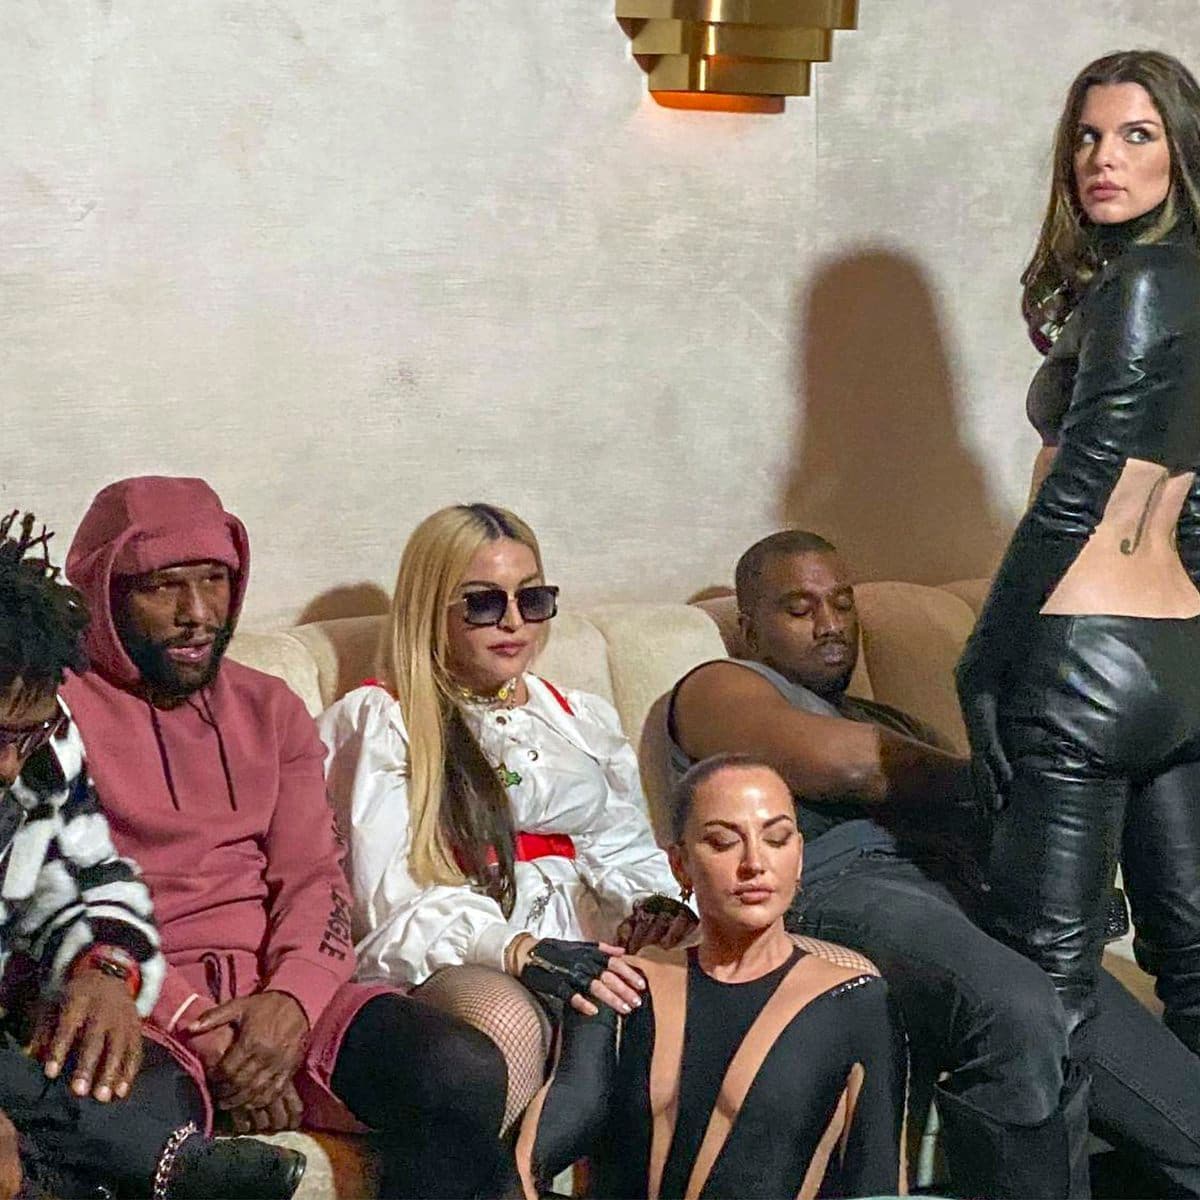 Madonna, Kanye West, Julia Fox, and Floyd Mayweather gather at a private party at Delilah